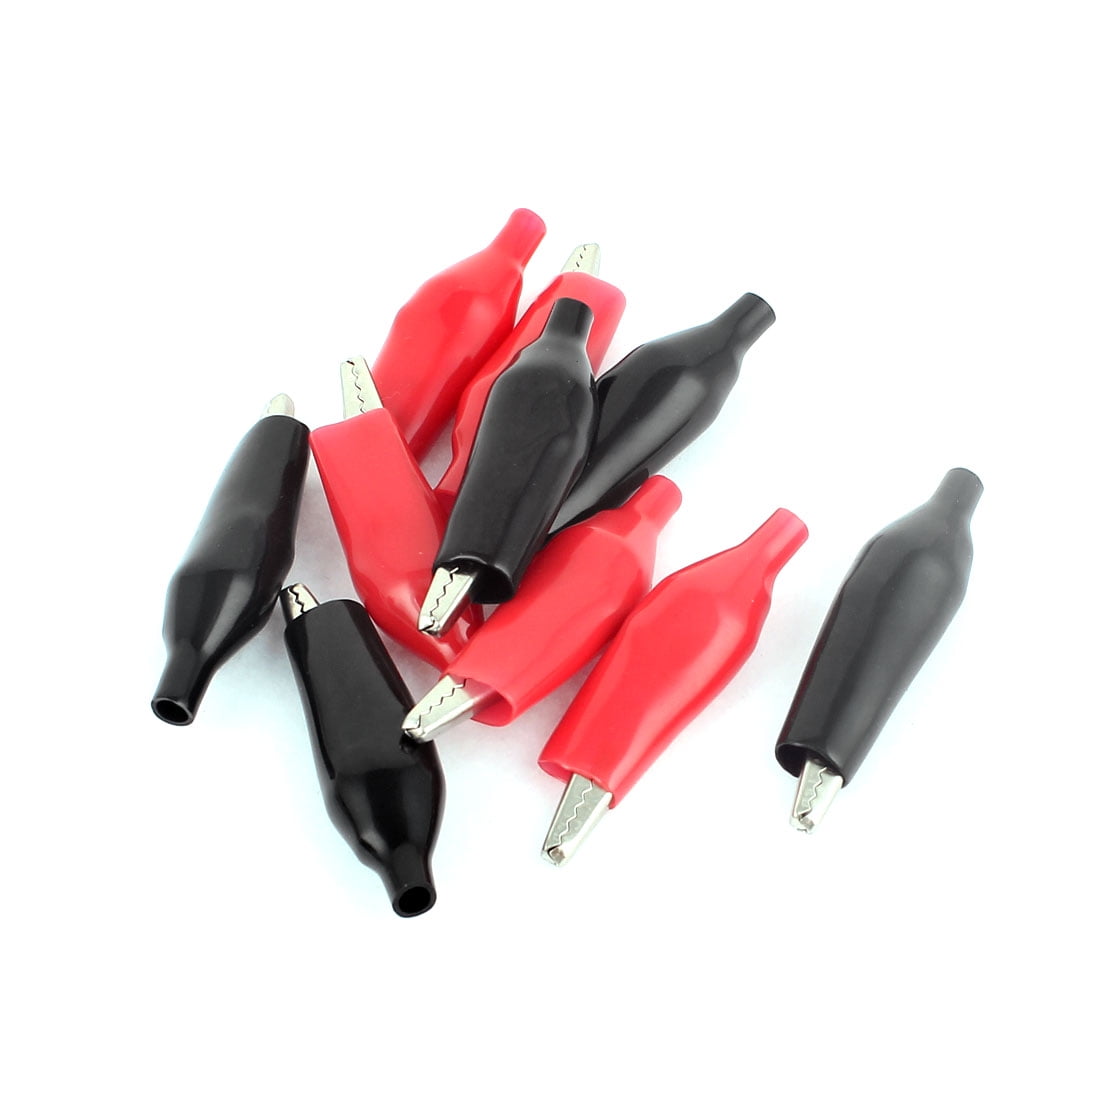 10 Pcs Insulated Alligator Clip Connector Soft Plastic Testing Probe 6 Colors 